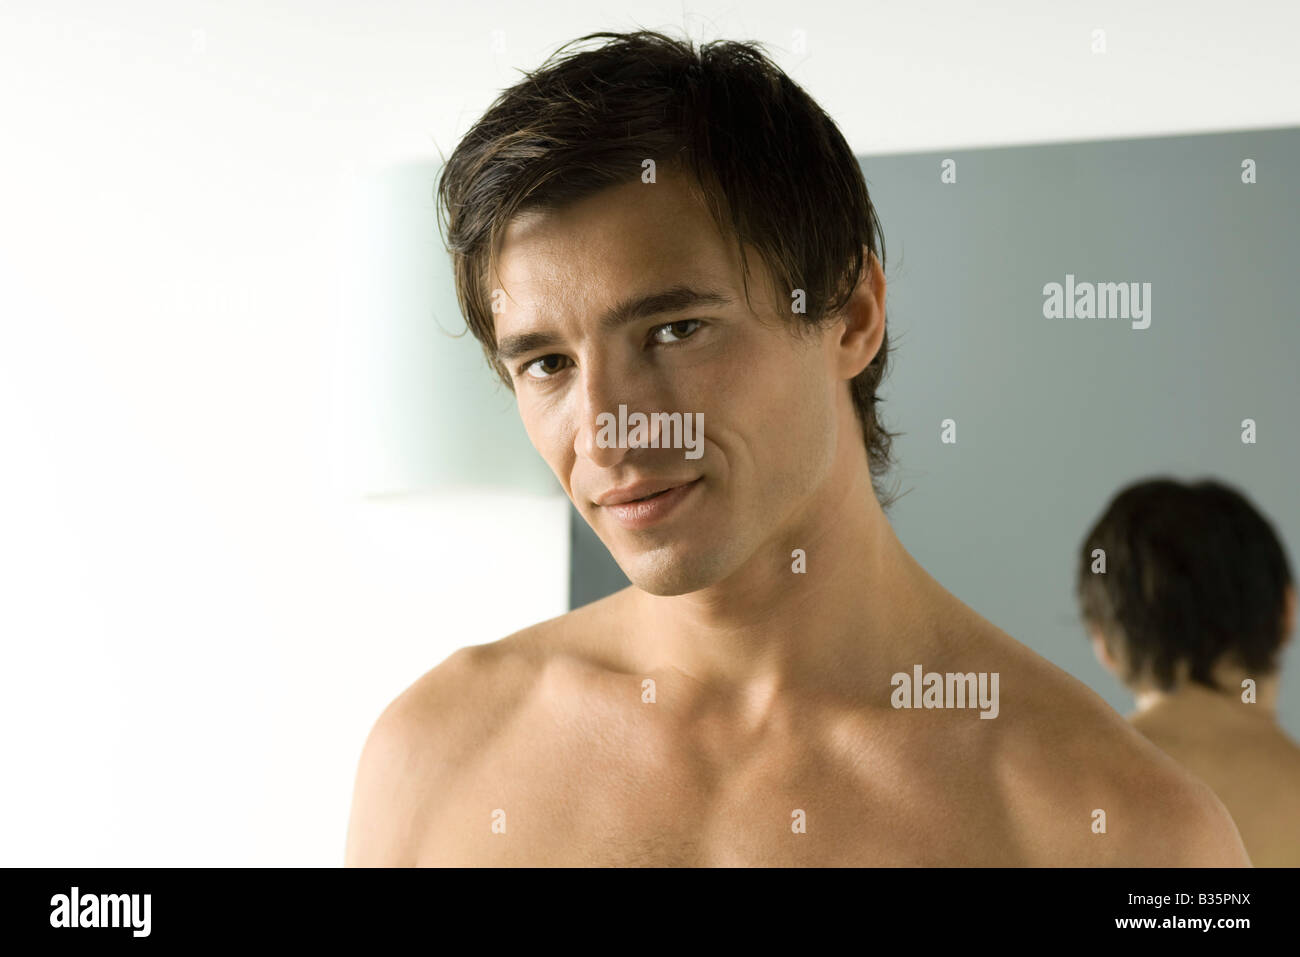 Bare-chested man smiling at camera, portrait Stock Photo